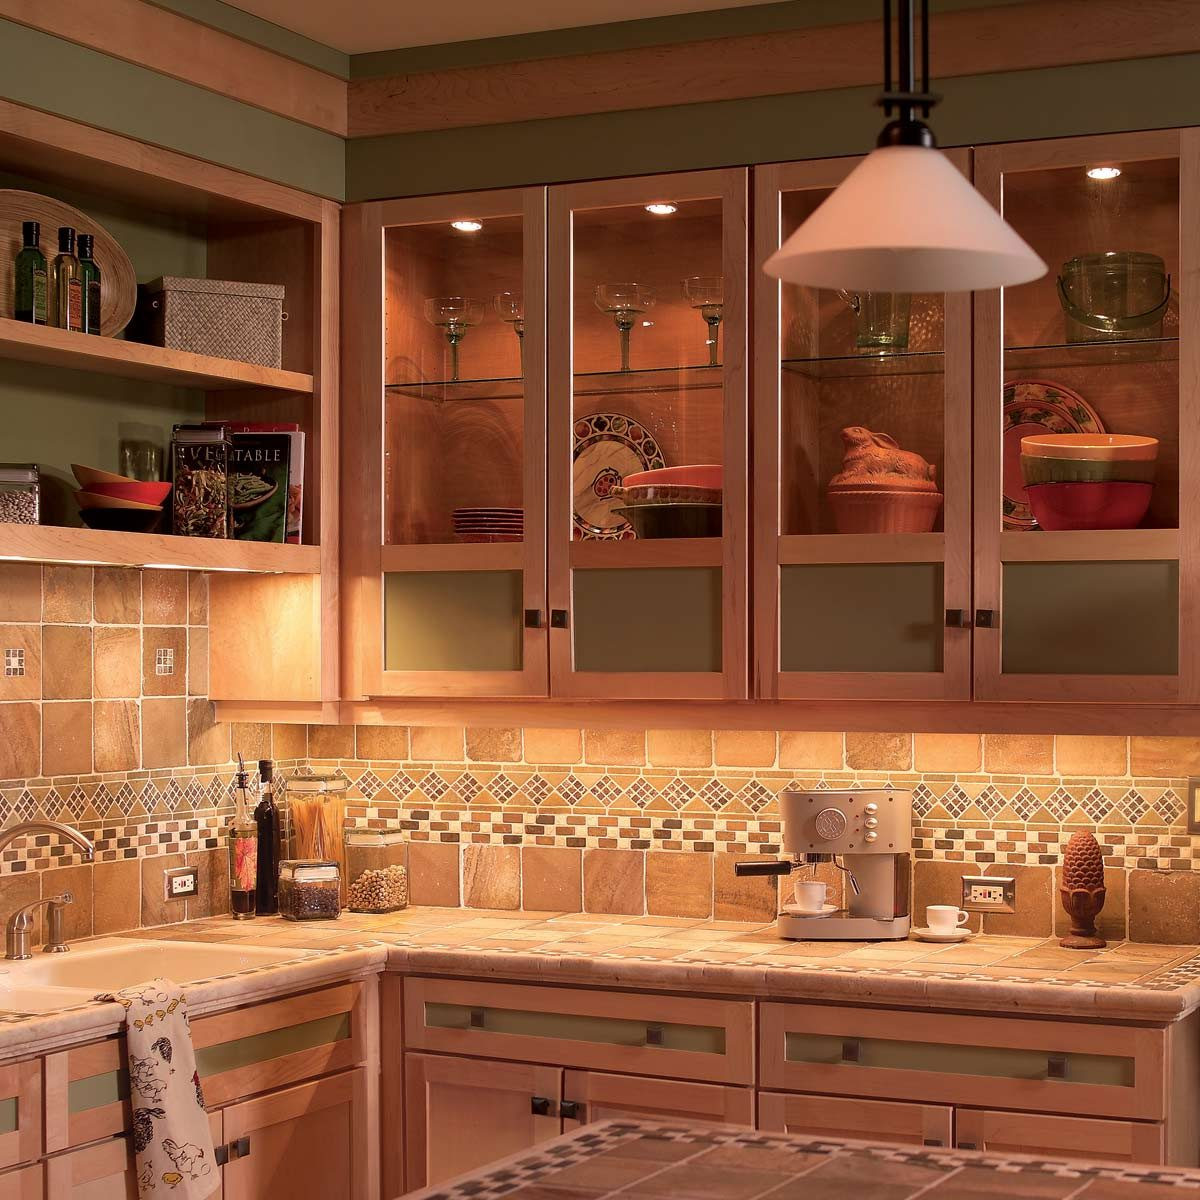 Kitchen Under Cabinet Lighting Options
 How to Install Under Cabinet Lighting in Your Kitchen